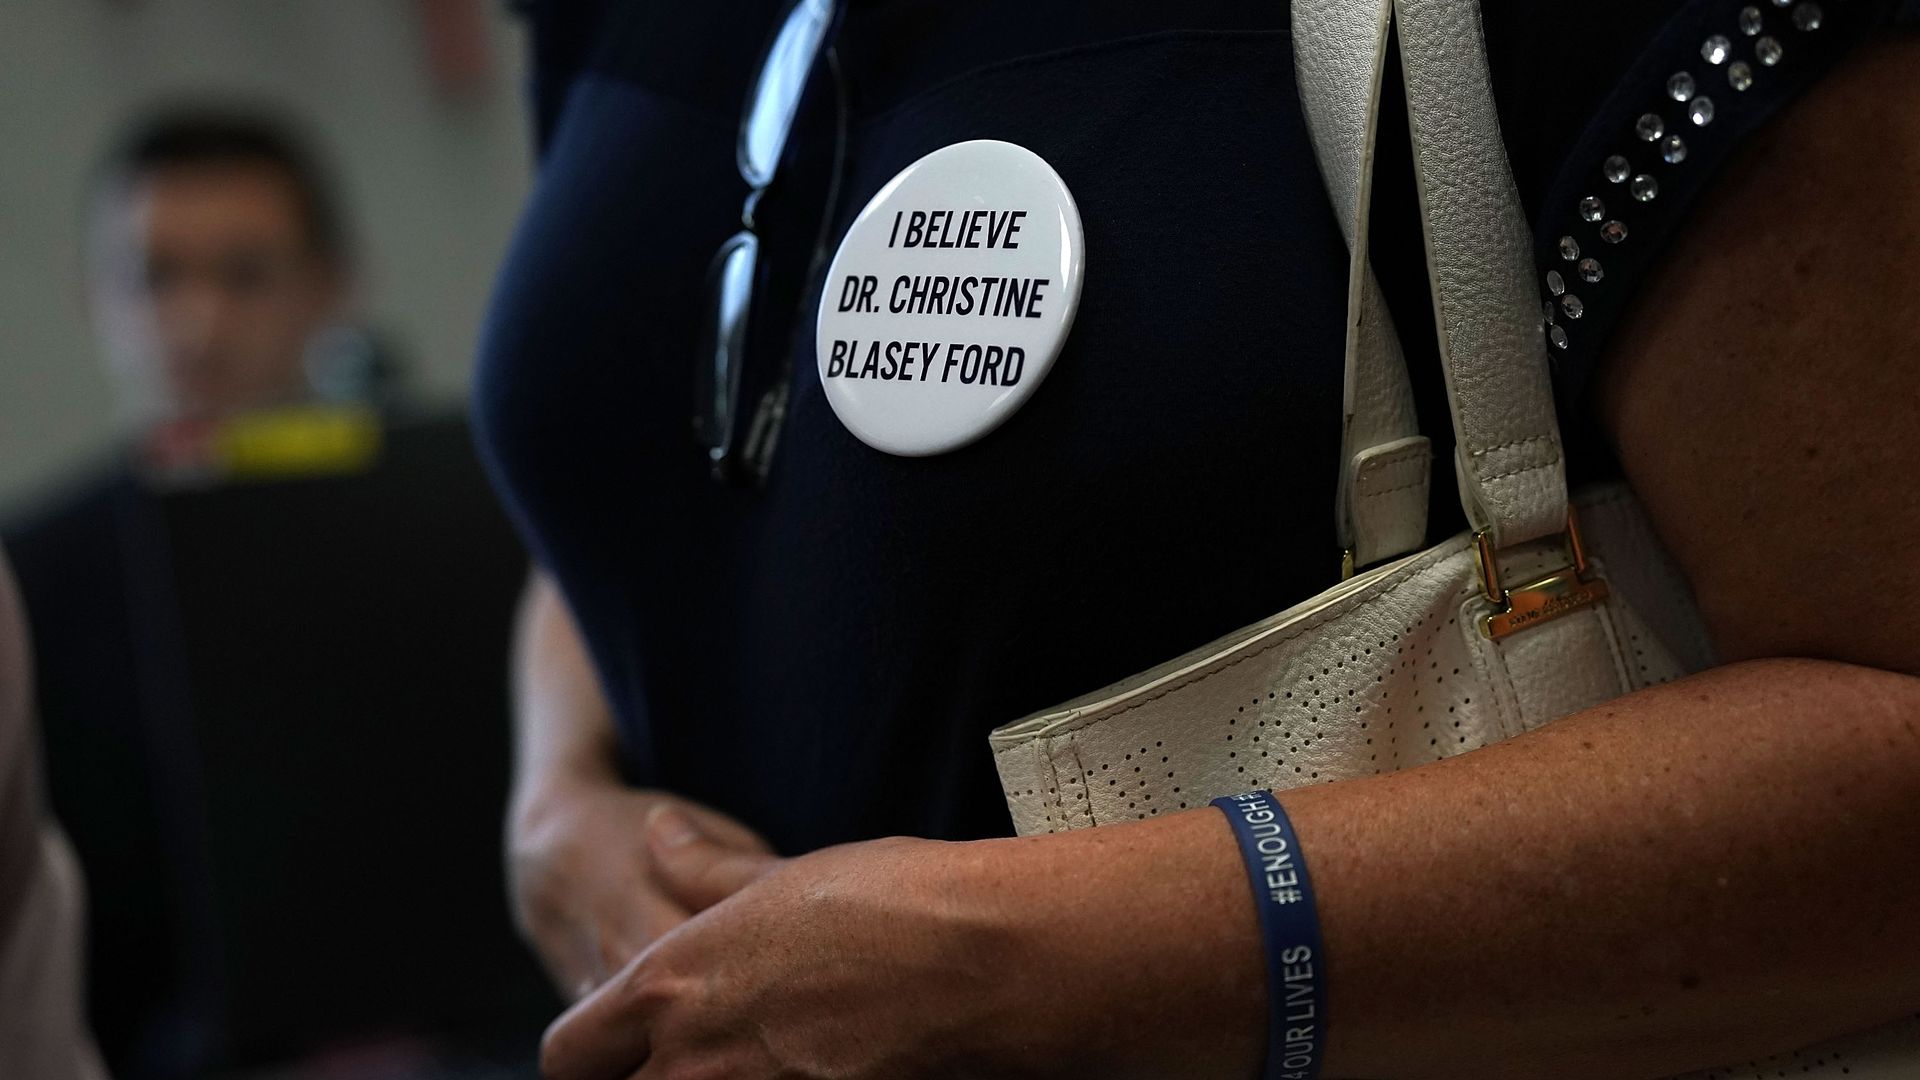 The chest of a woman wearing a dark blue shirt with a white round pin that says "I believe Dr. Christine Blasey Ford" 